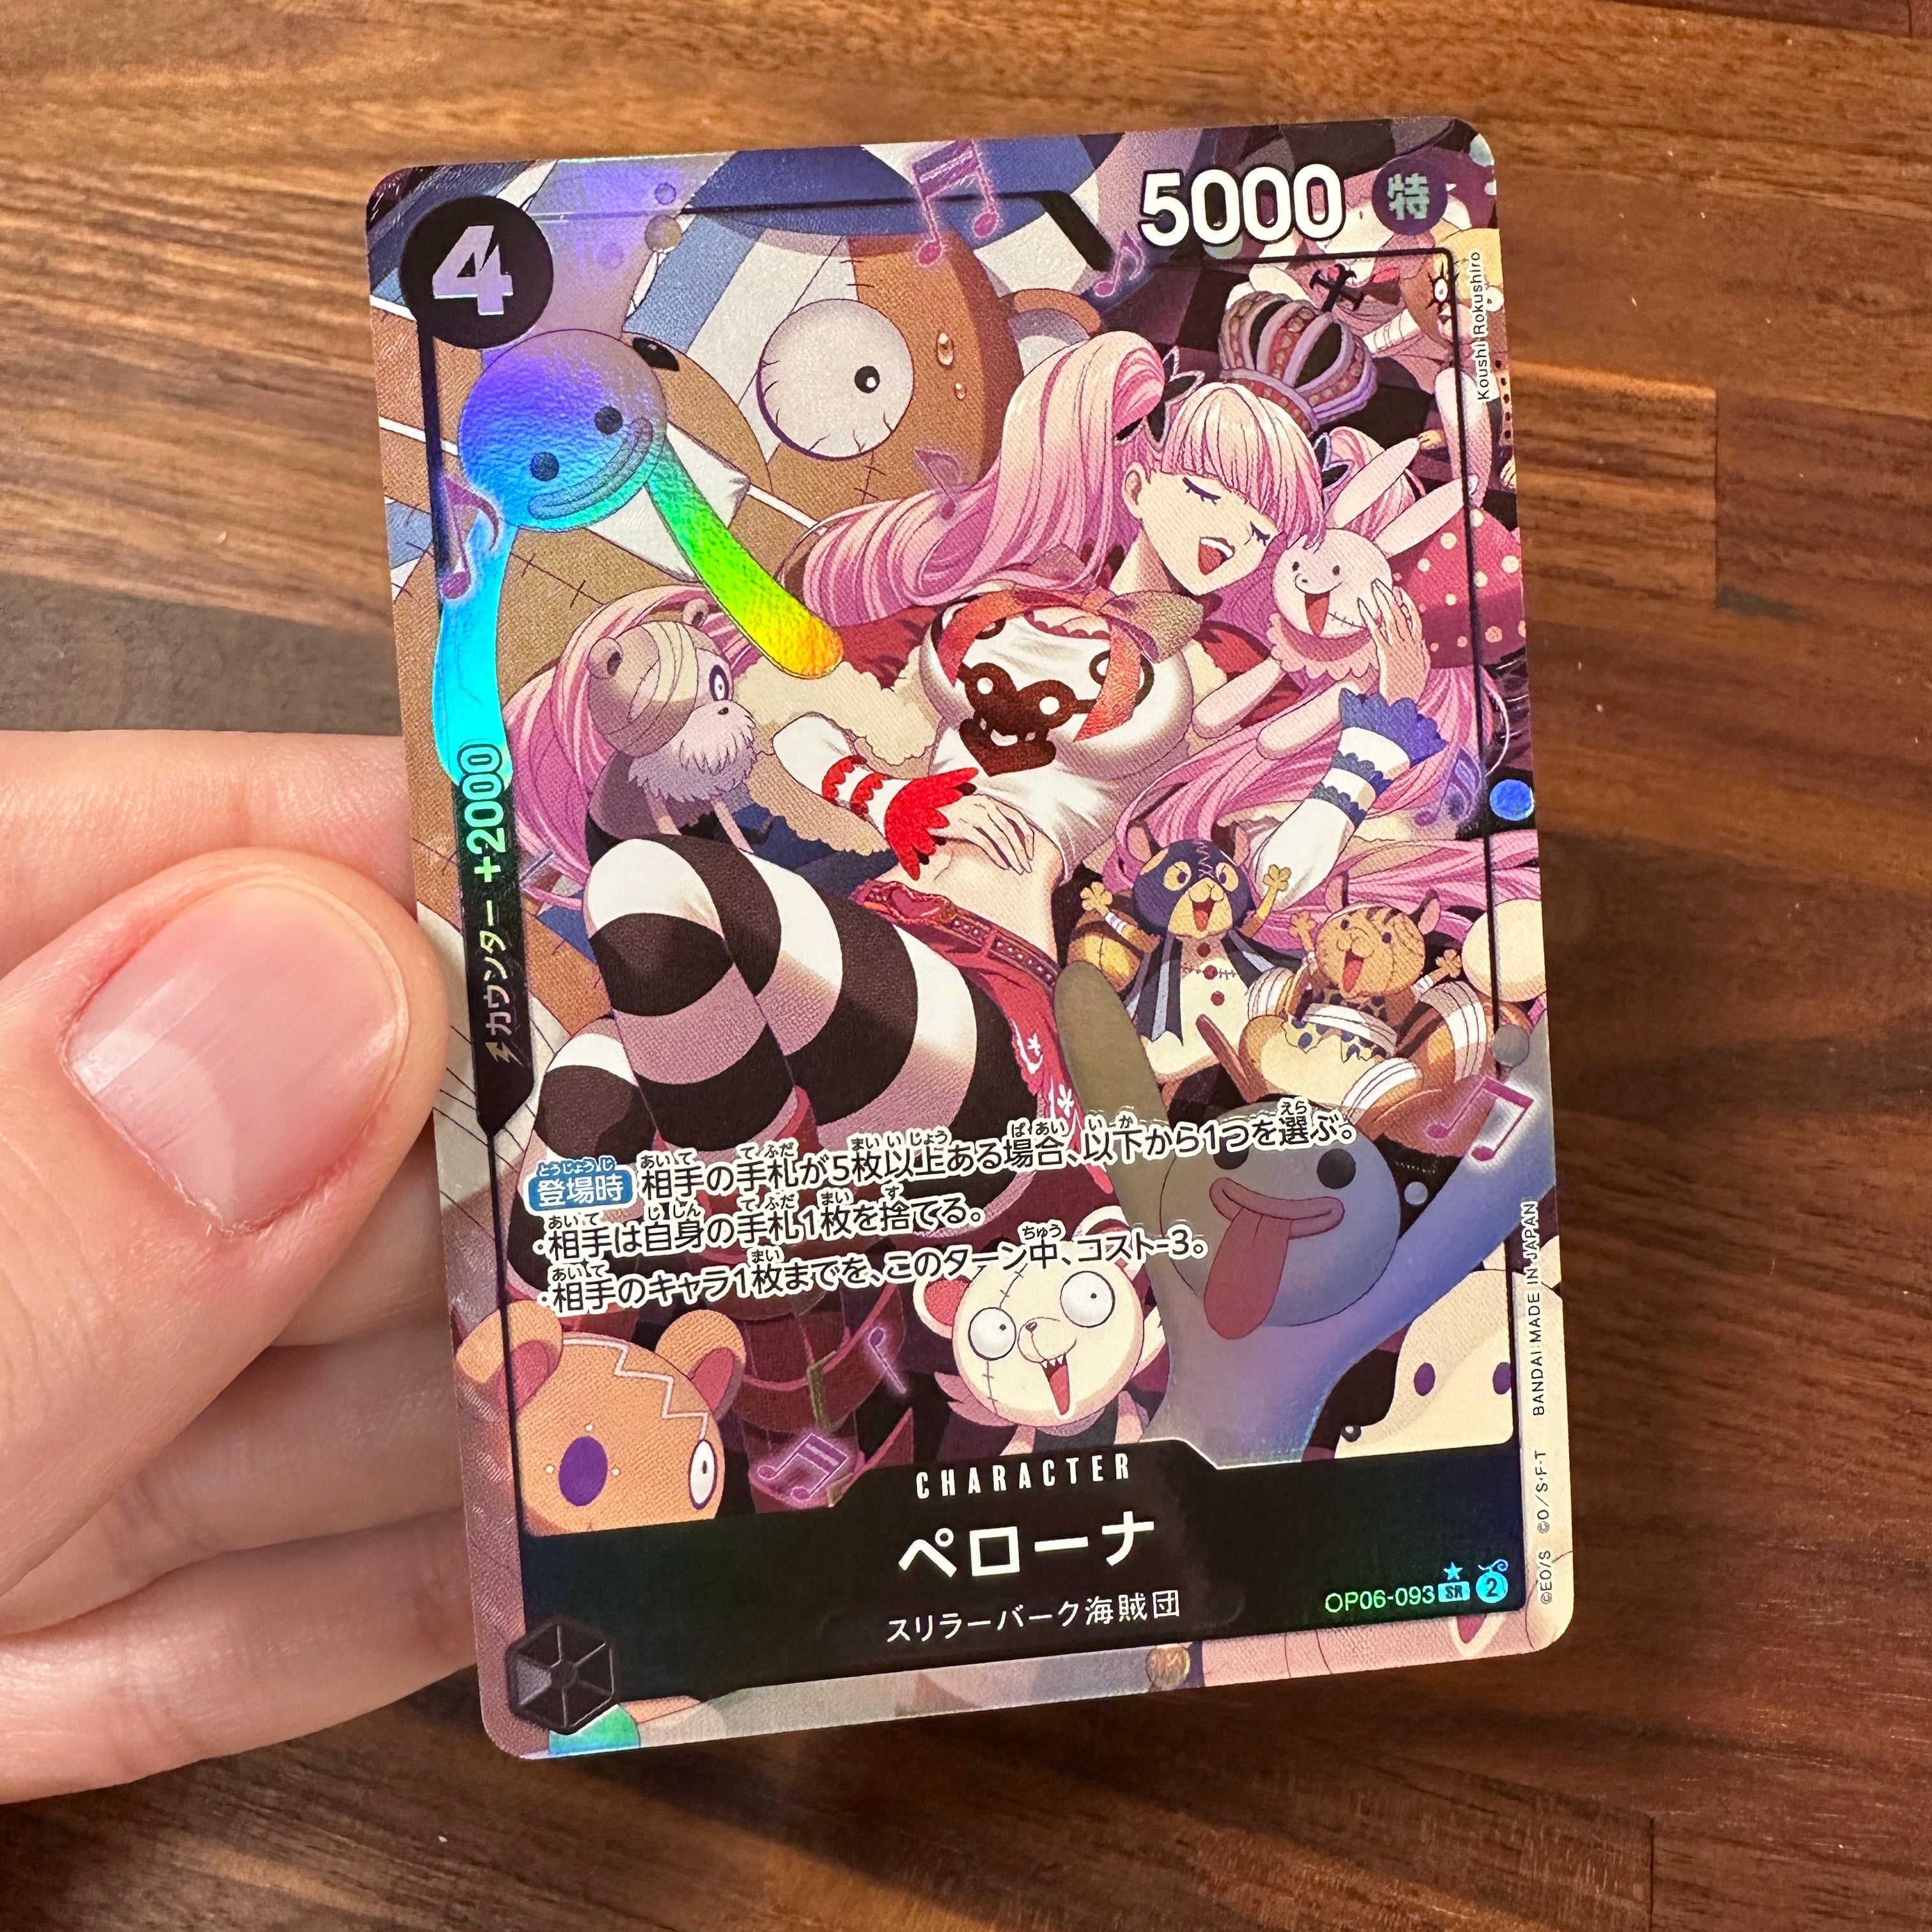 ONE PIECE CARD GAME ｢Wings of Captain｣  ONE PIECE CARD GAME OP06-093 Super Rare card Parallel  Perona